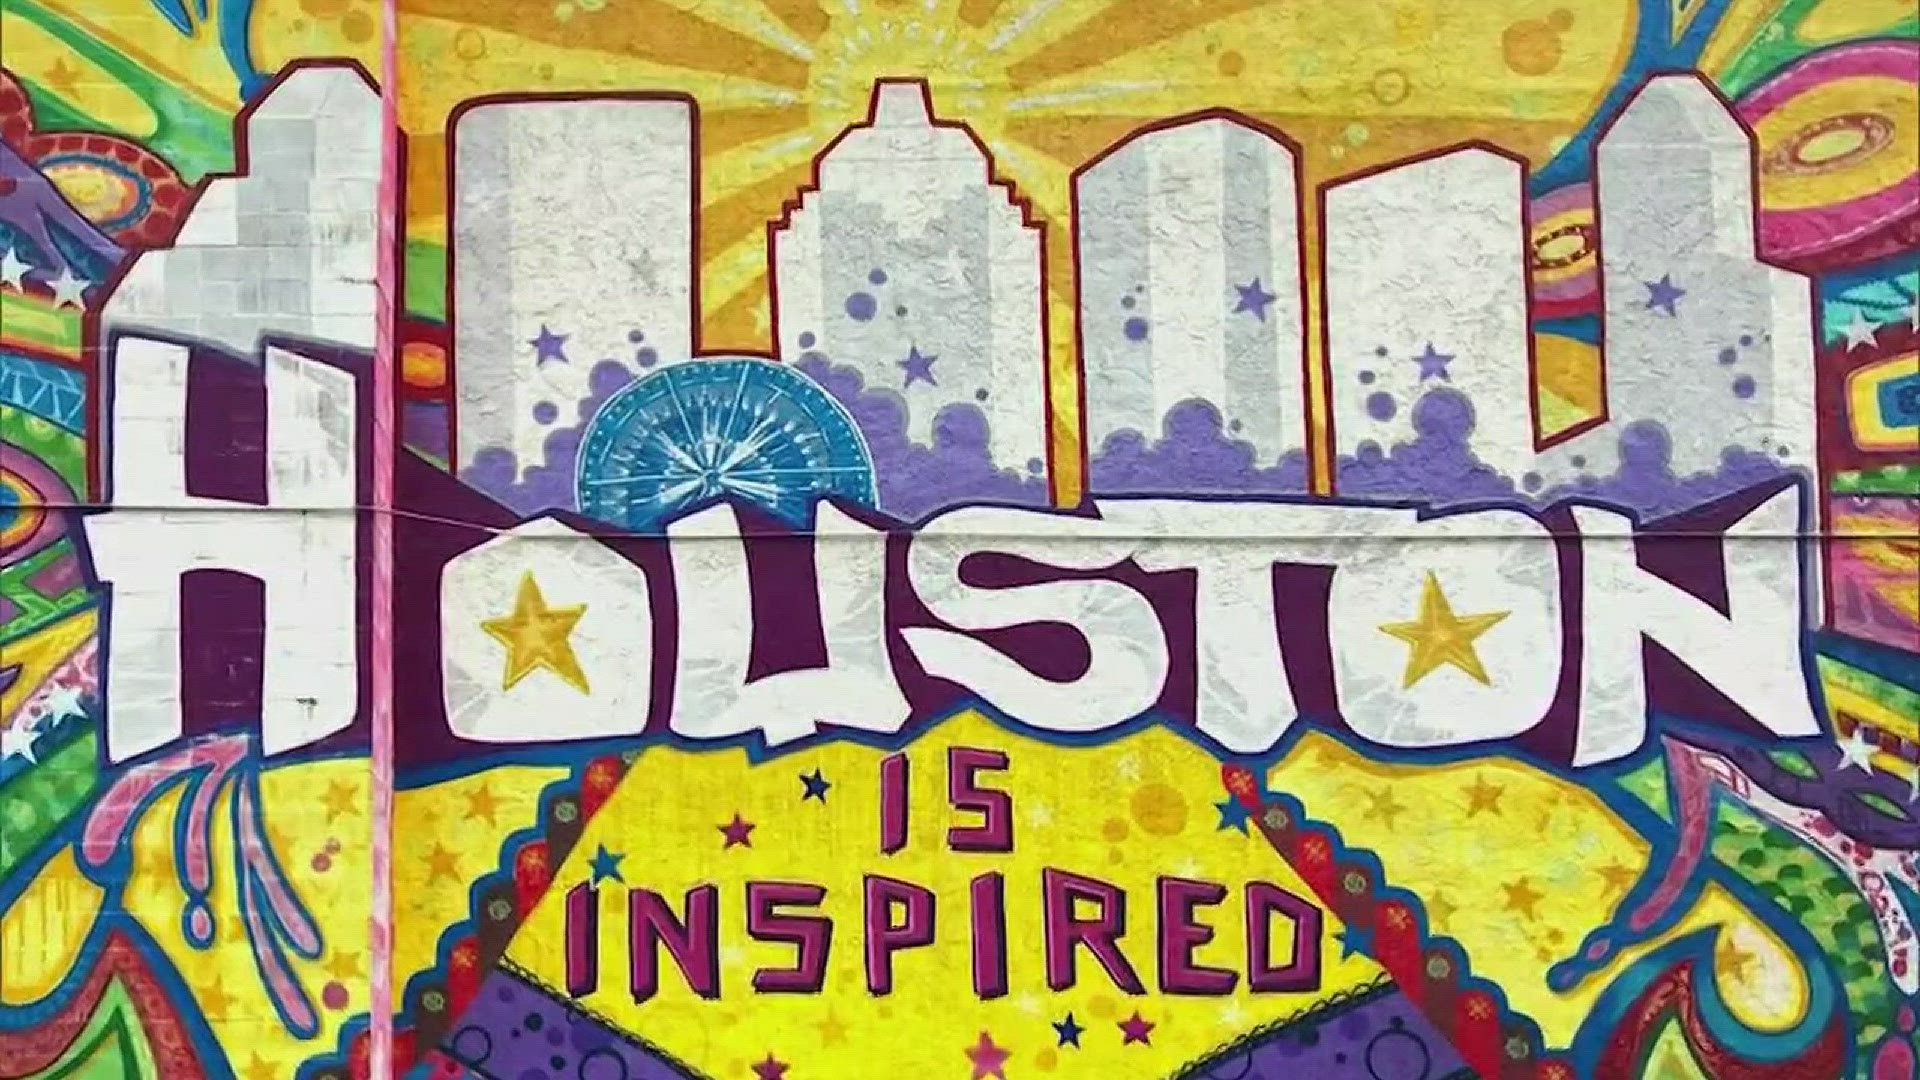 Calling all local artists! The City of Houston is planning to add even more art murals around town.